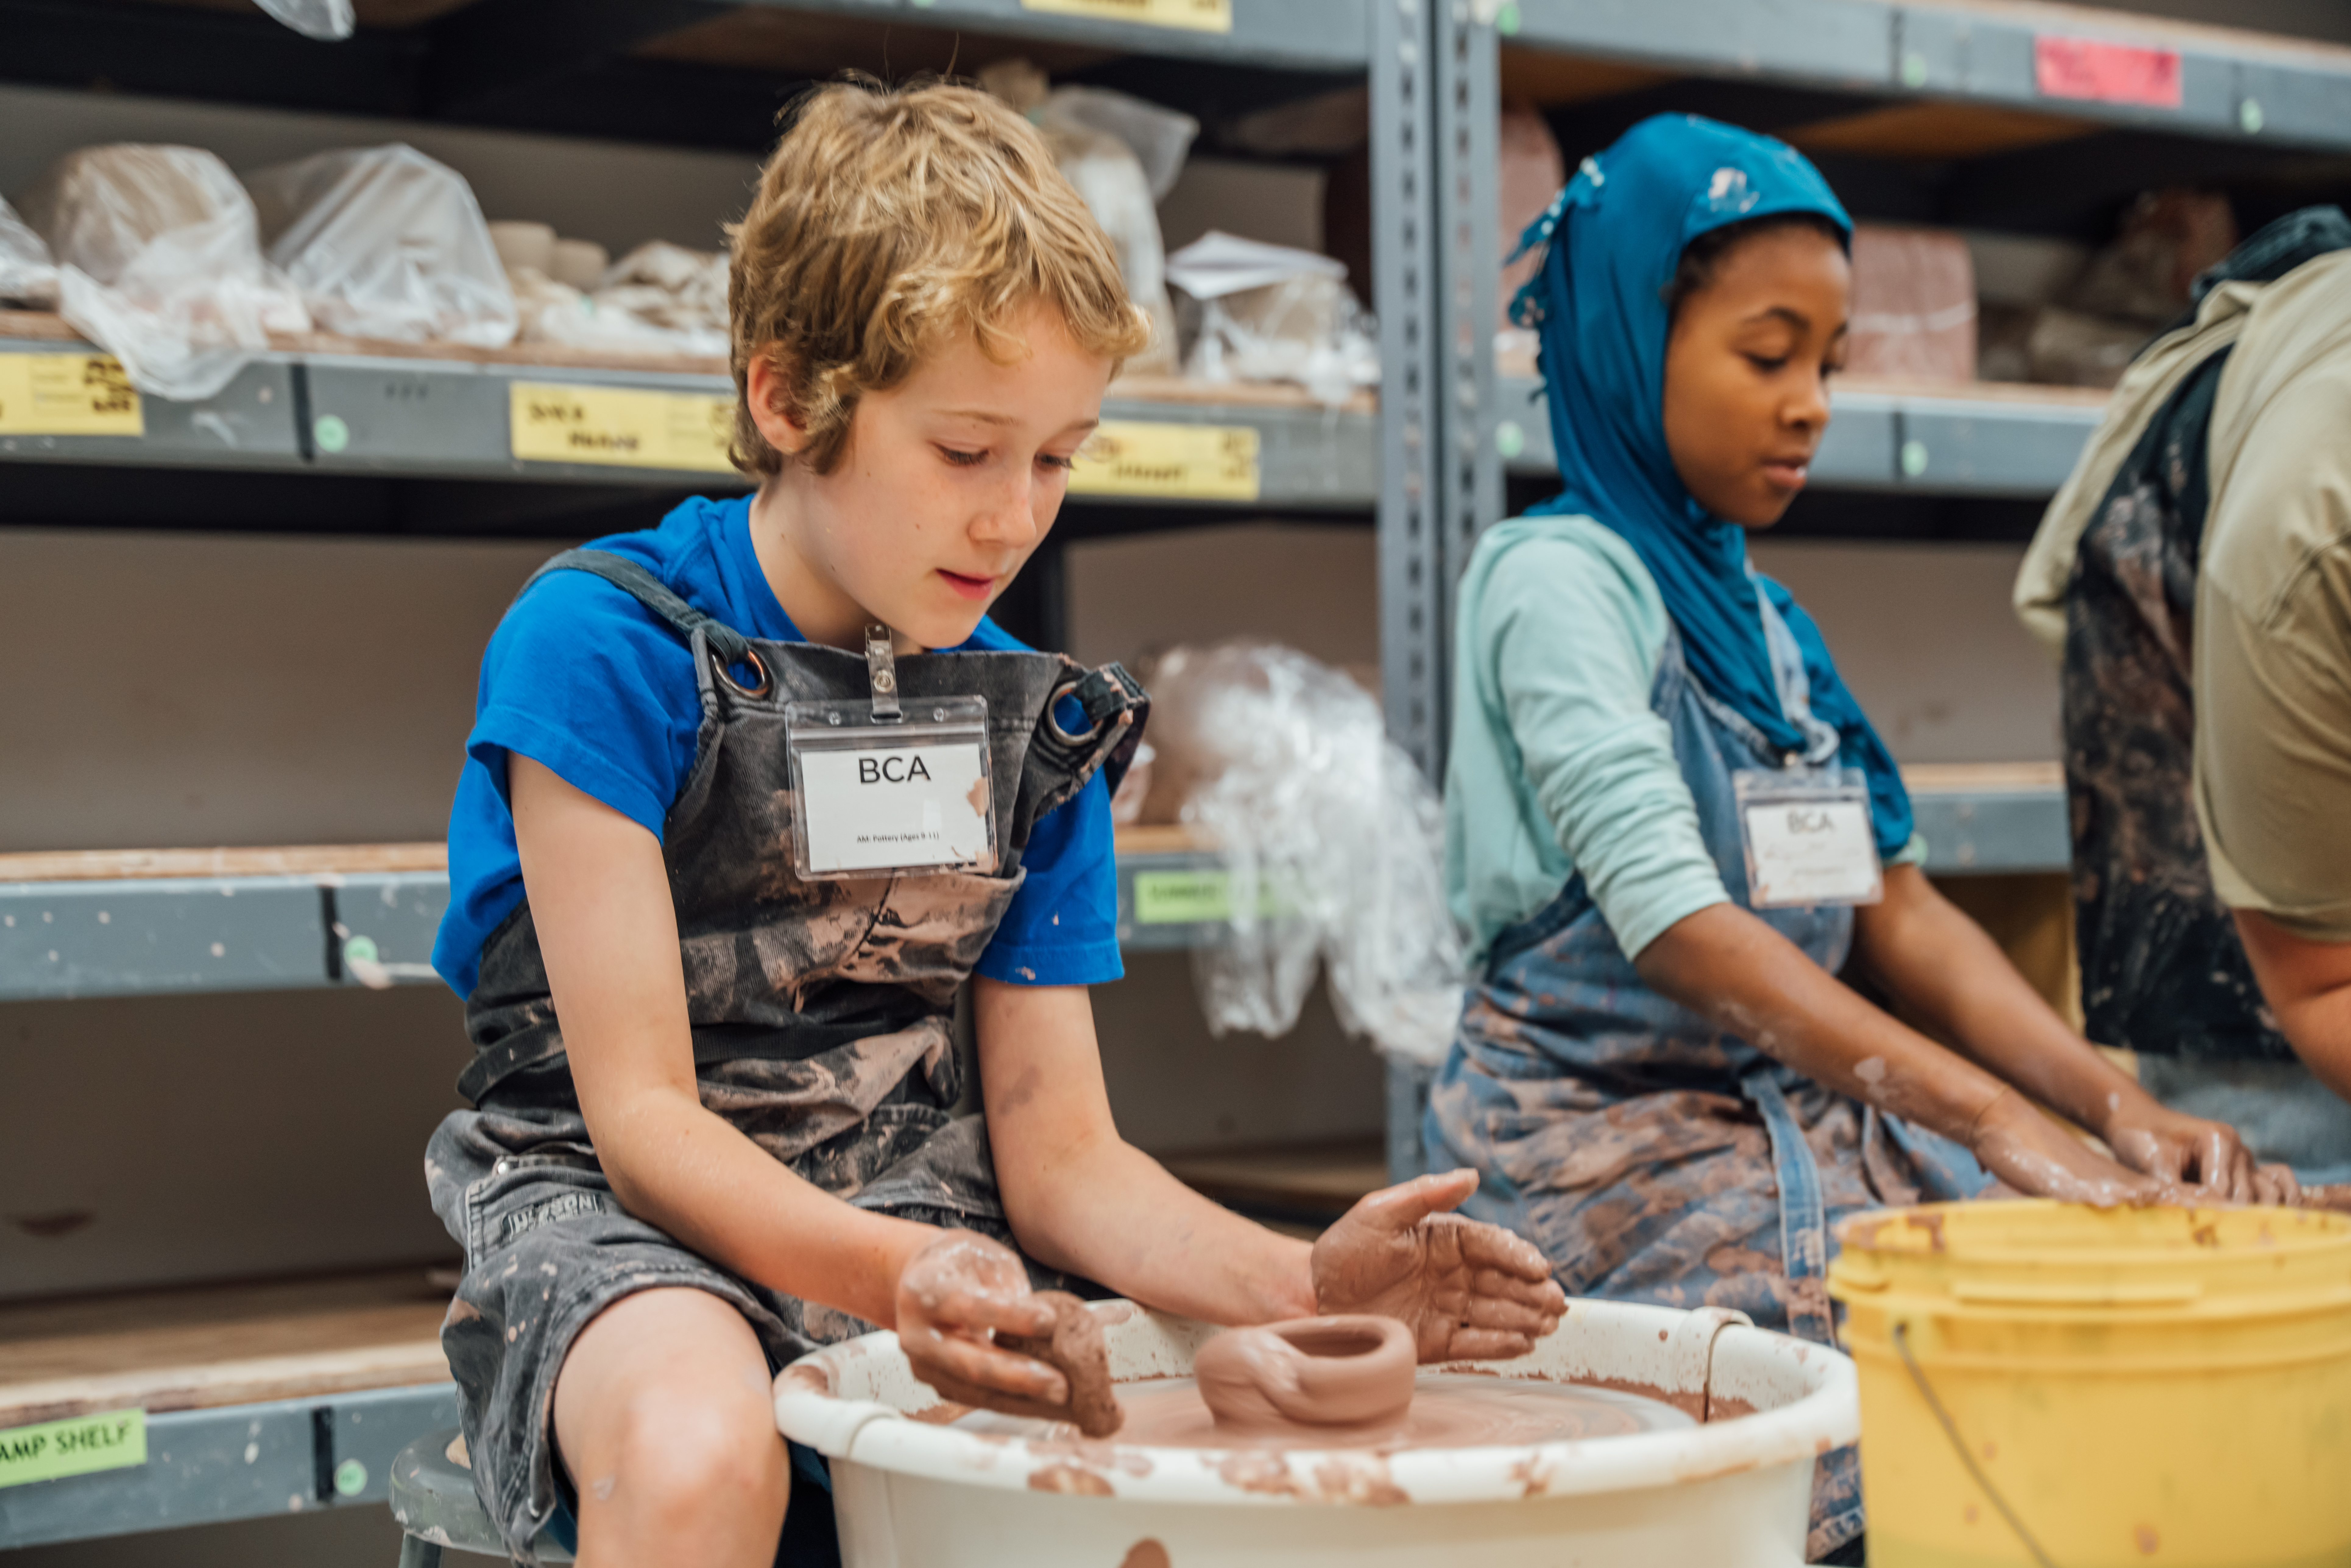 Two campers create pottery at the BCA Studios pottery wheel.